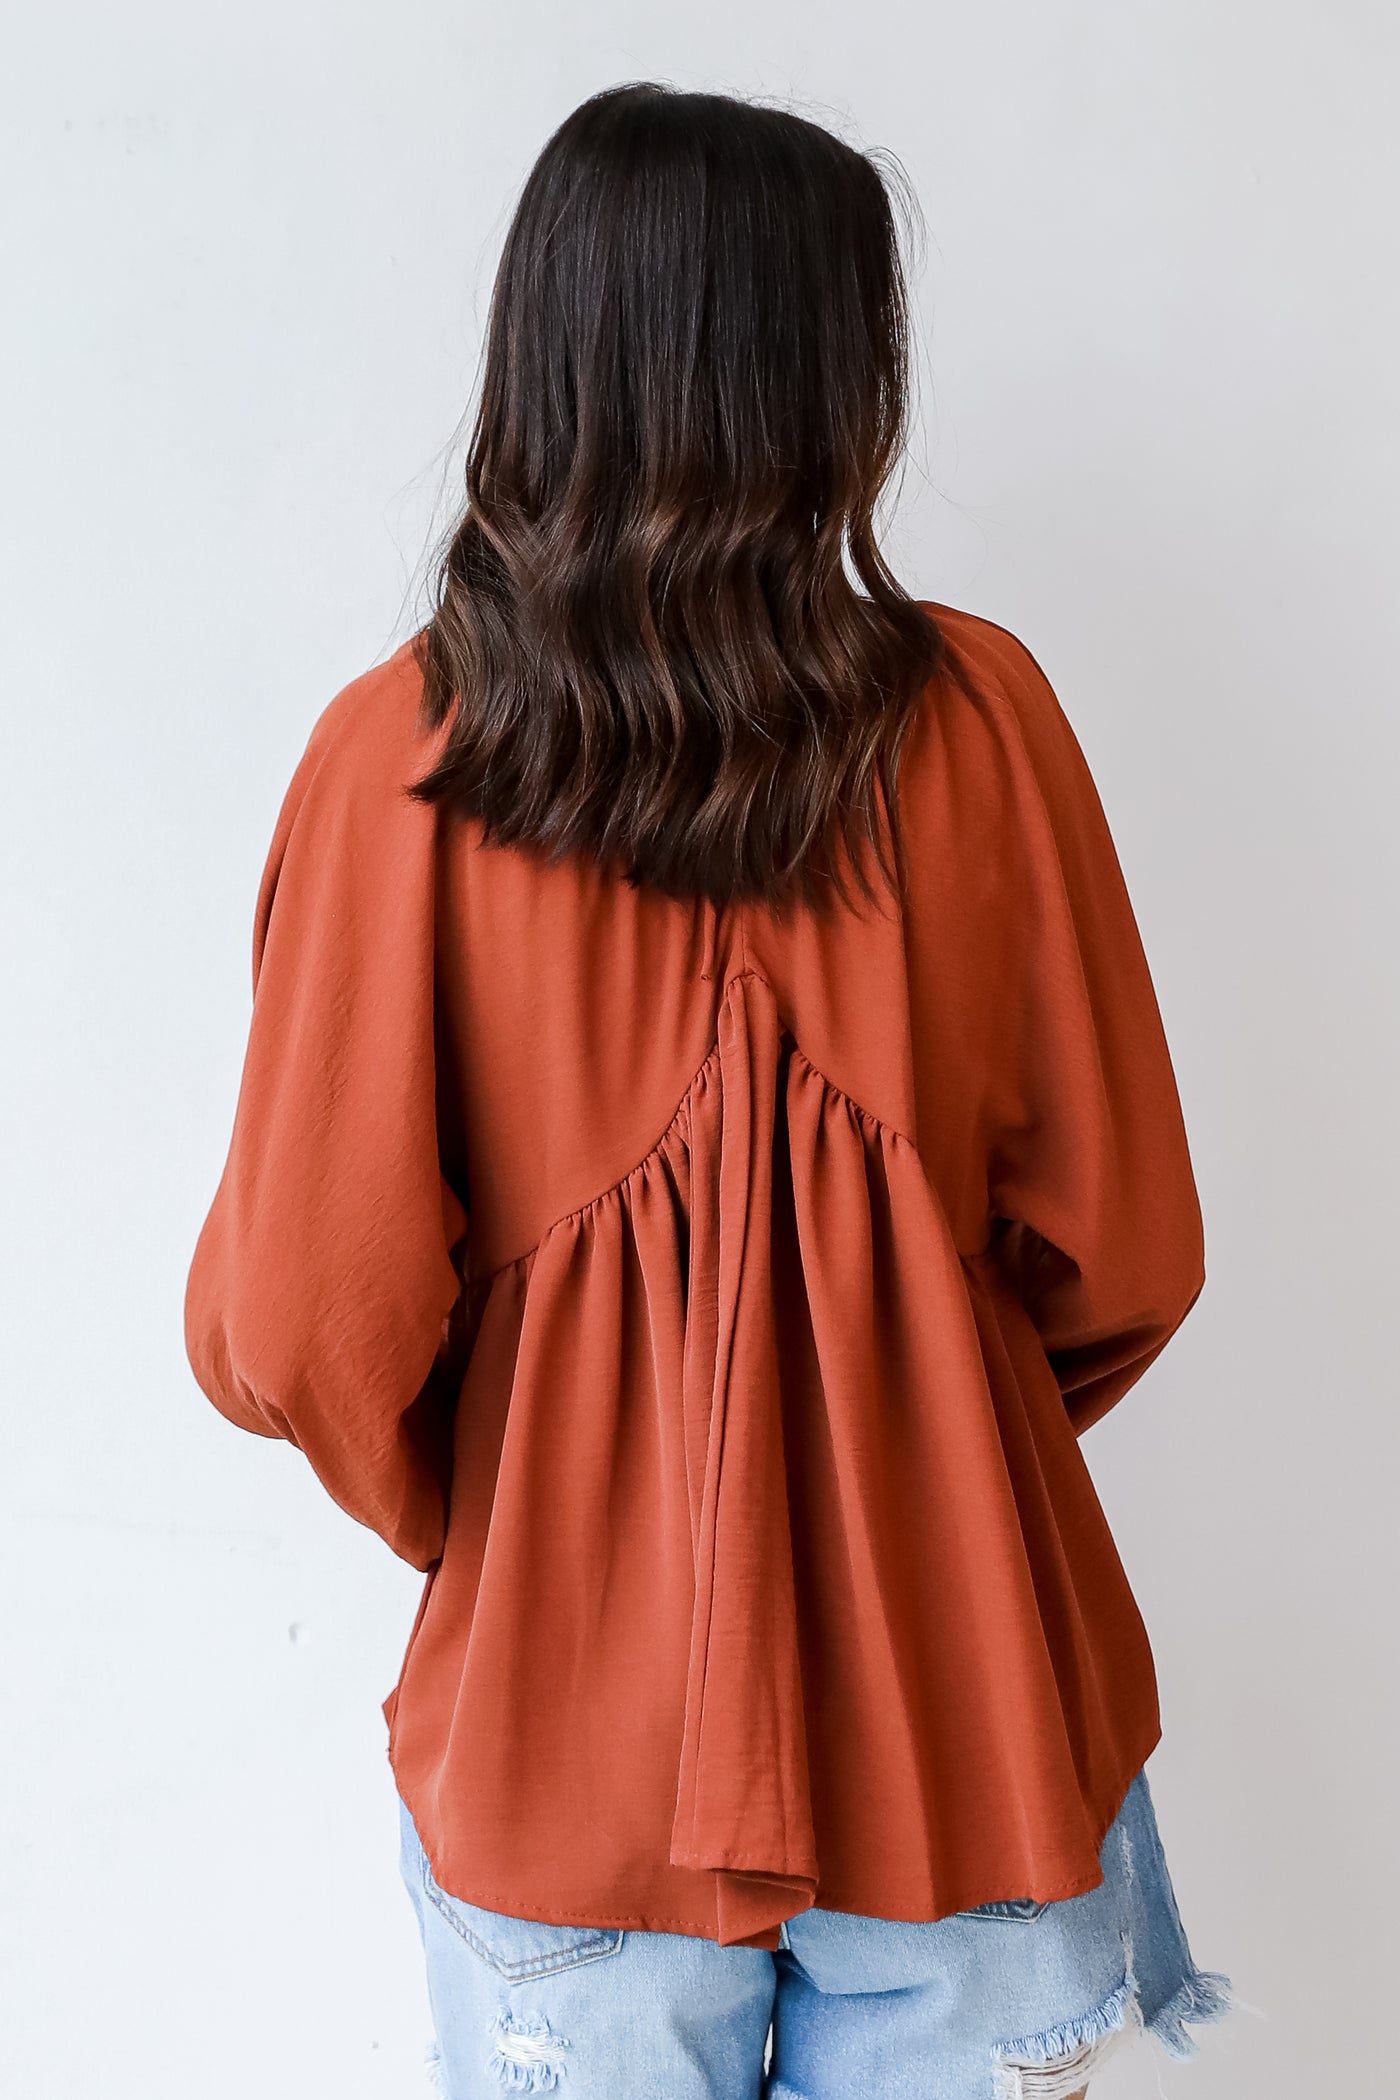 Babydoll Blouse in rust back view